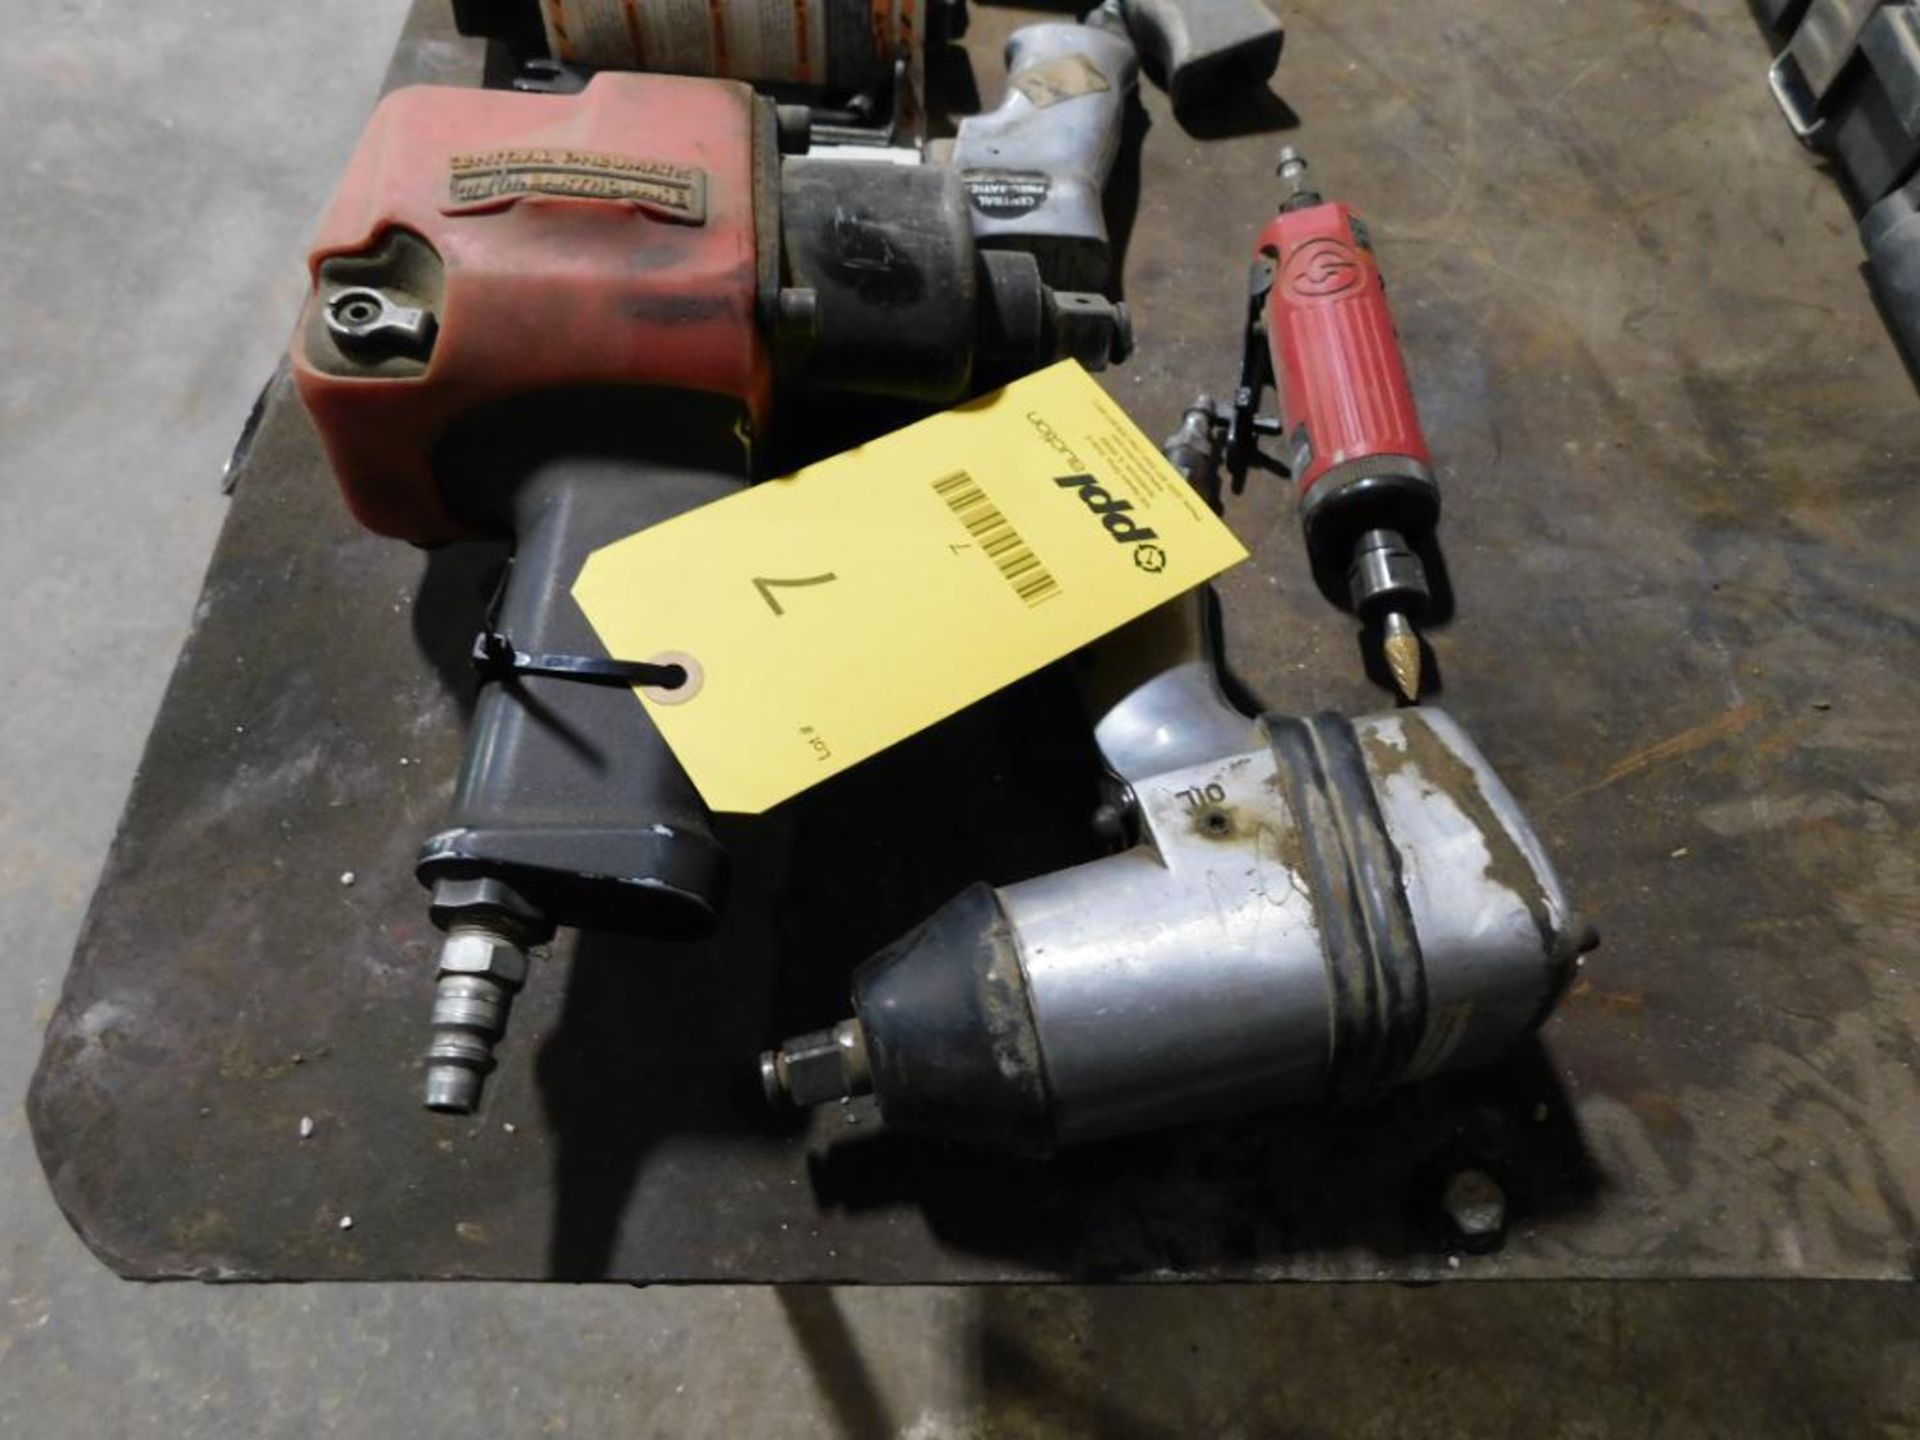 LOT: (2) Pnuematic Impact Wrenches & Assorted Pnuematic Tools (LOCATED IN MAINTENANCE AREA) - Image 2 of 2